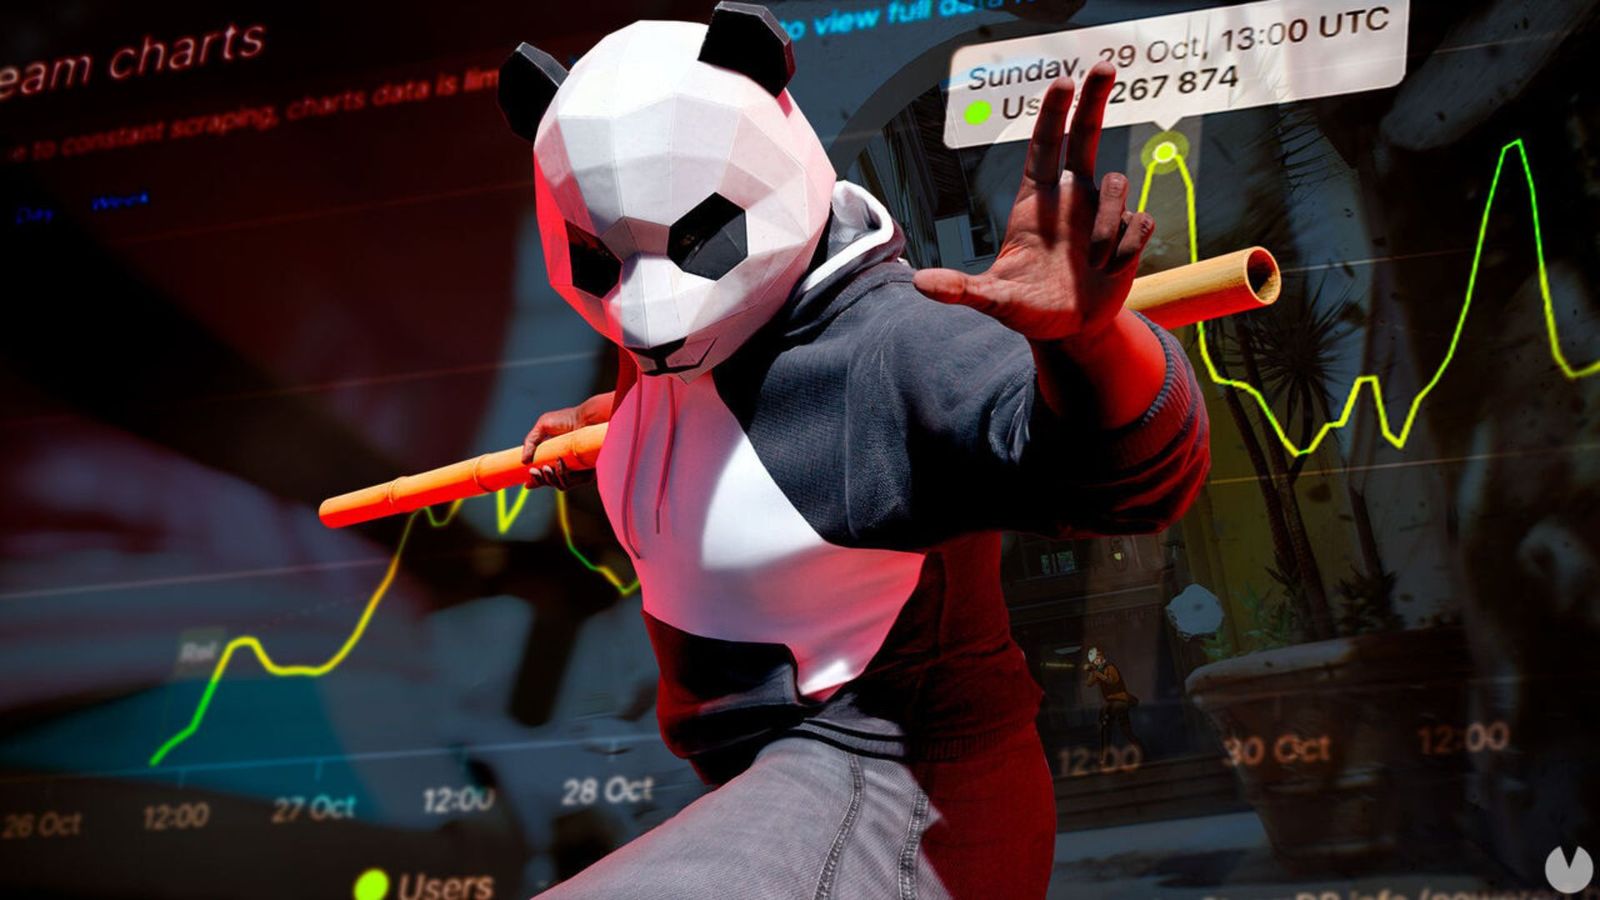 A The Finals character dressed as a panda using a bamboo stick as a melee weapon